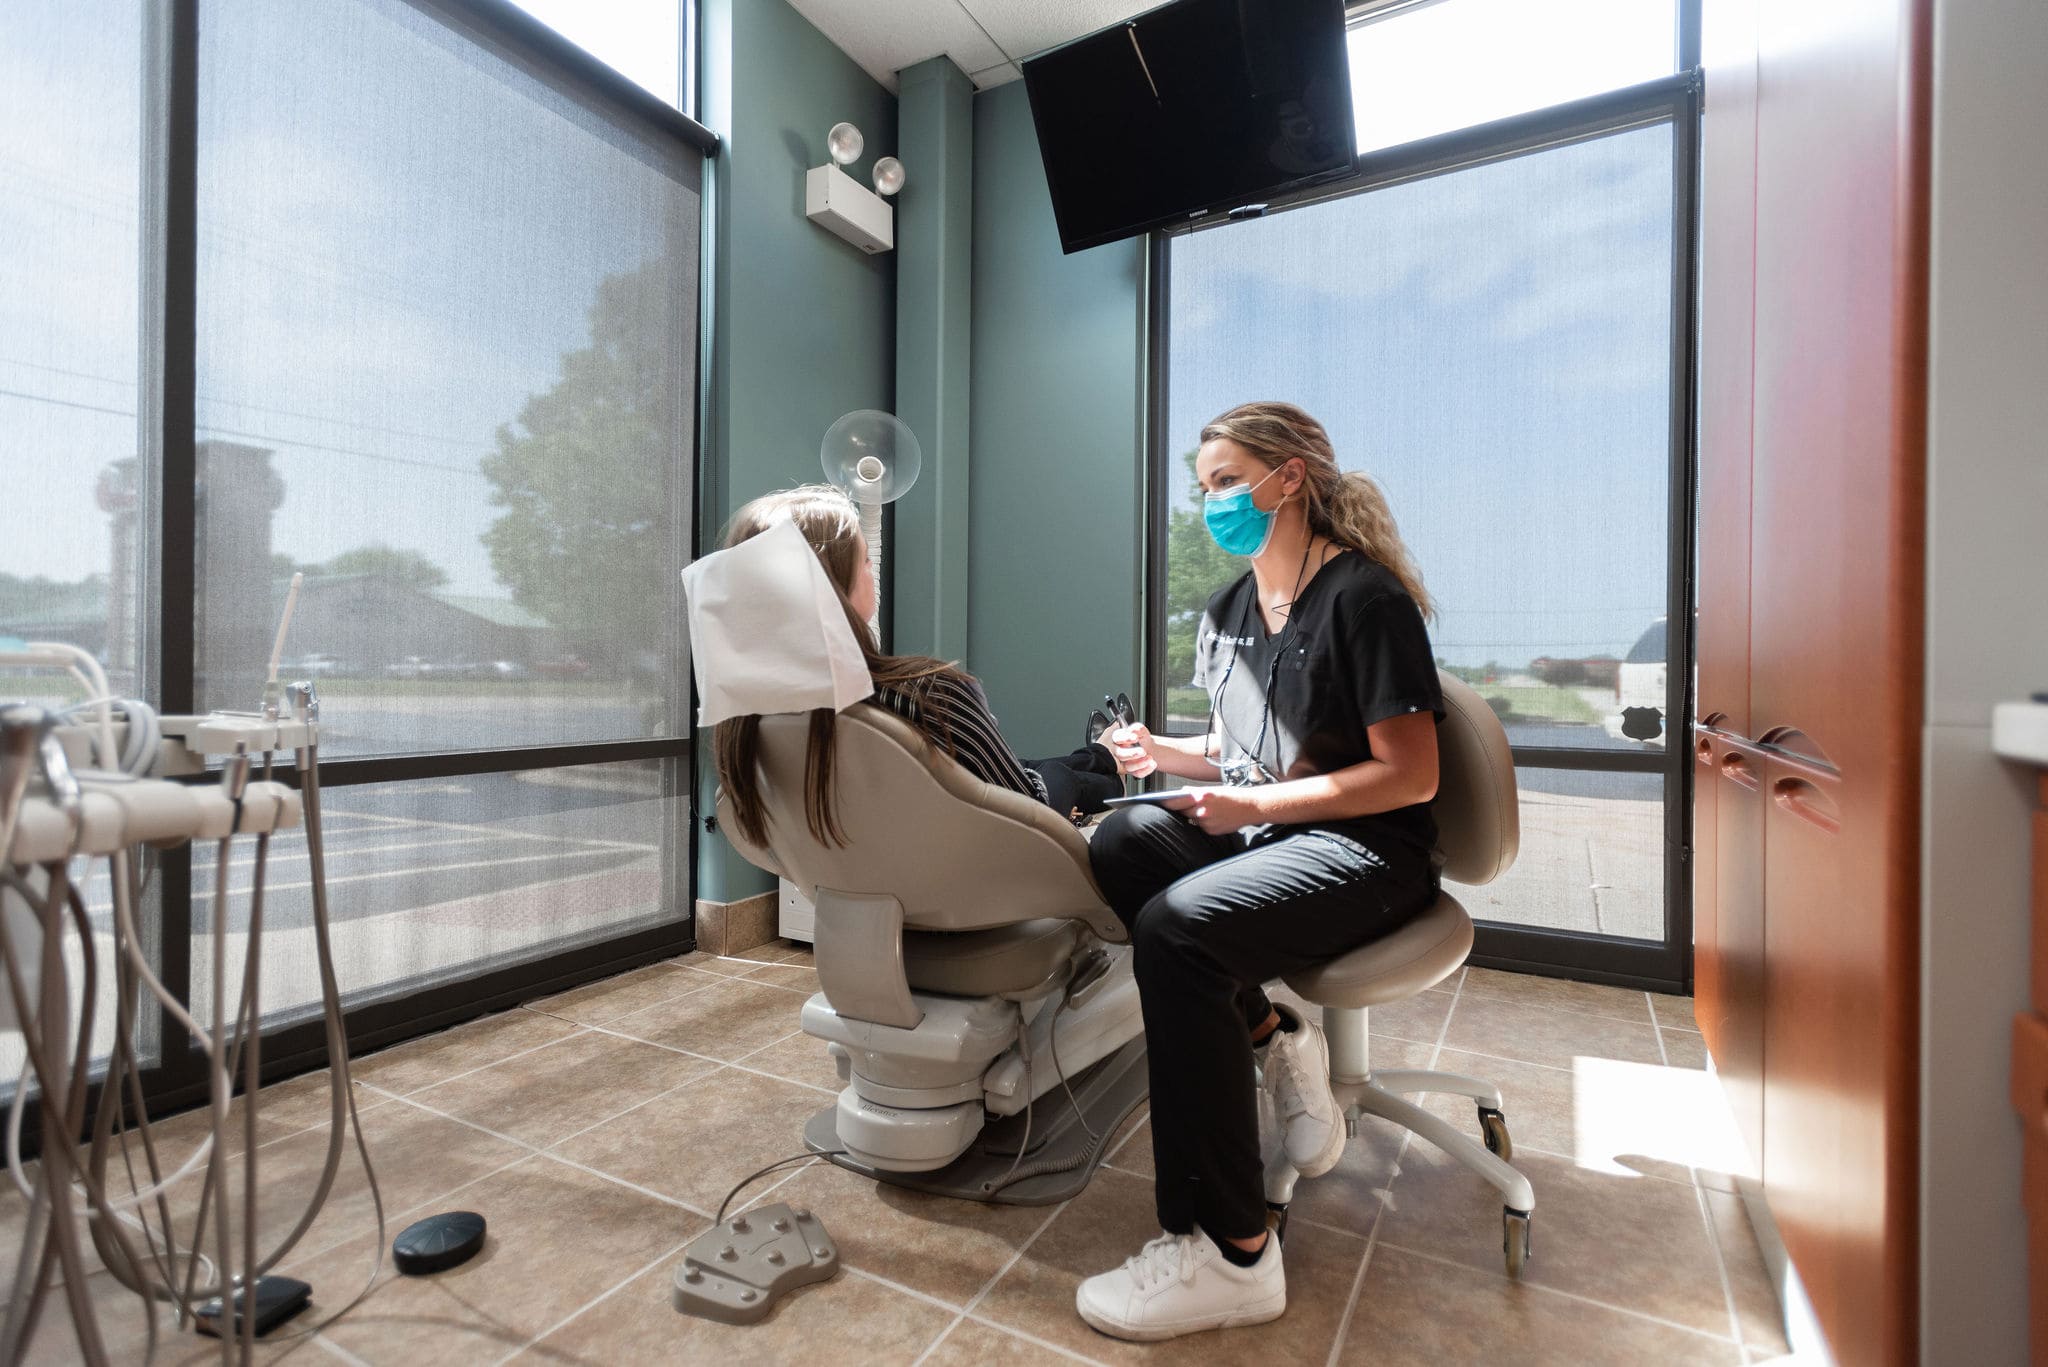 815 Dental Studio [Formerly Schoening Dental Care] - Cherry Valley, IL, US, dental implant cost